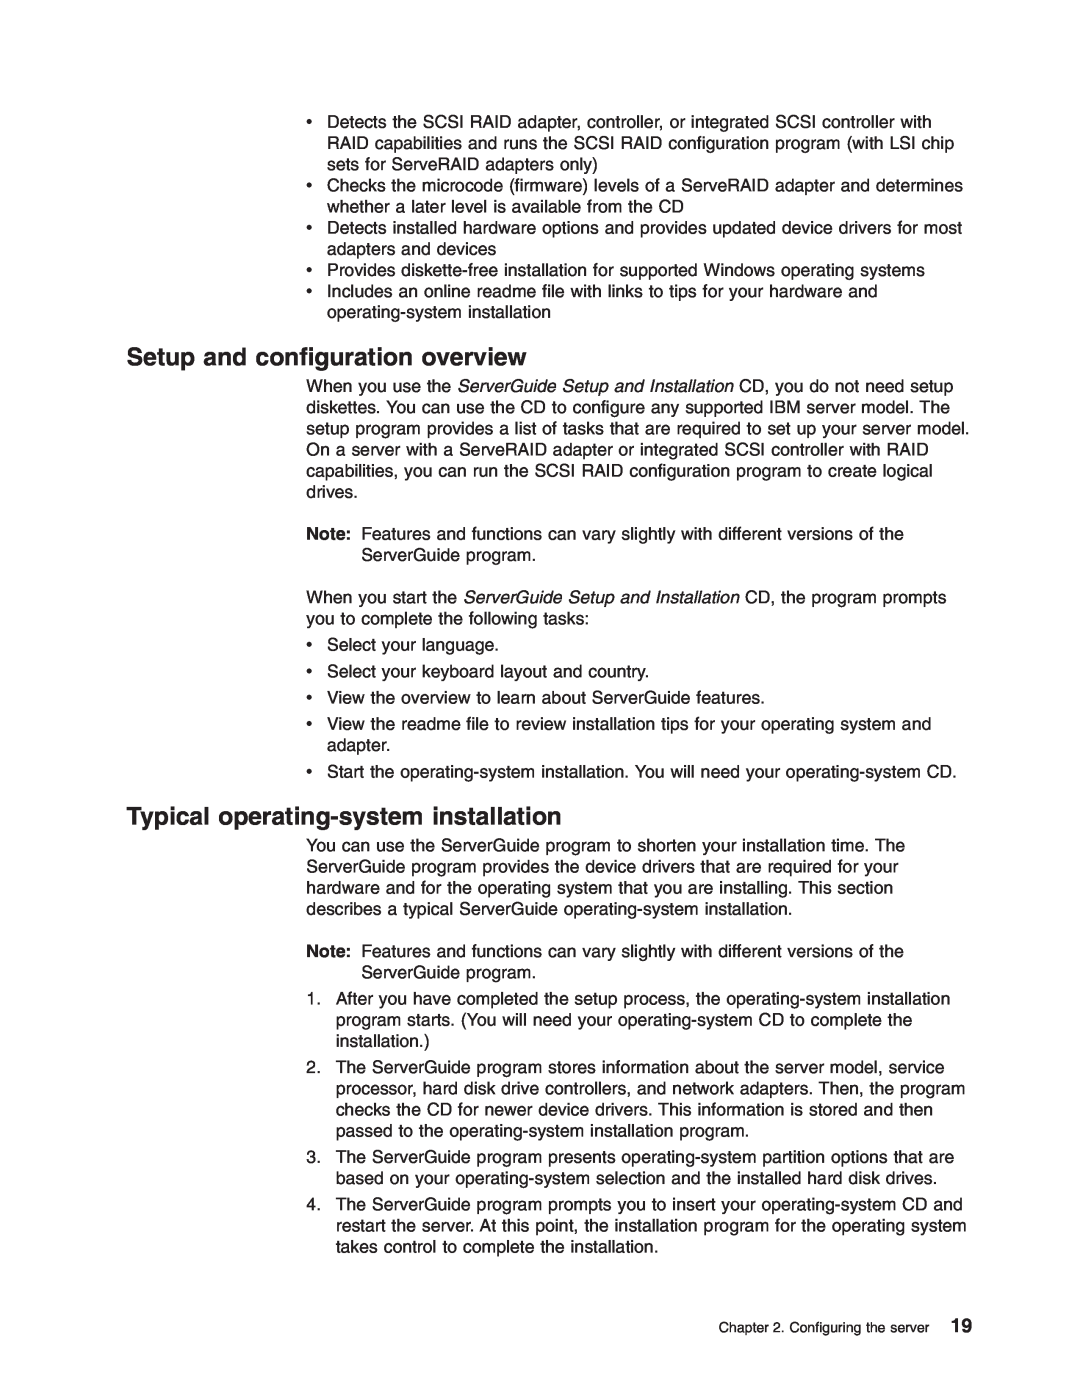 IBM 8840 manual Setup and configuration overview, Typical operating-system installation 